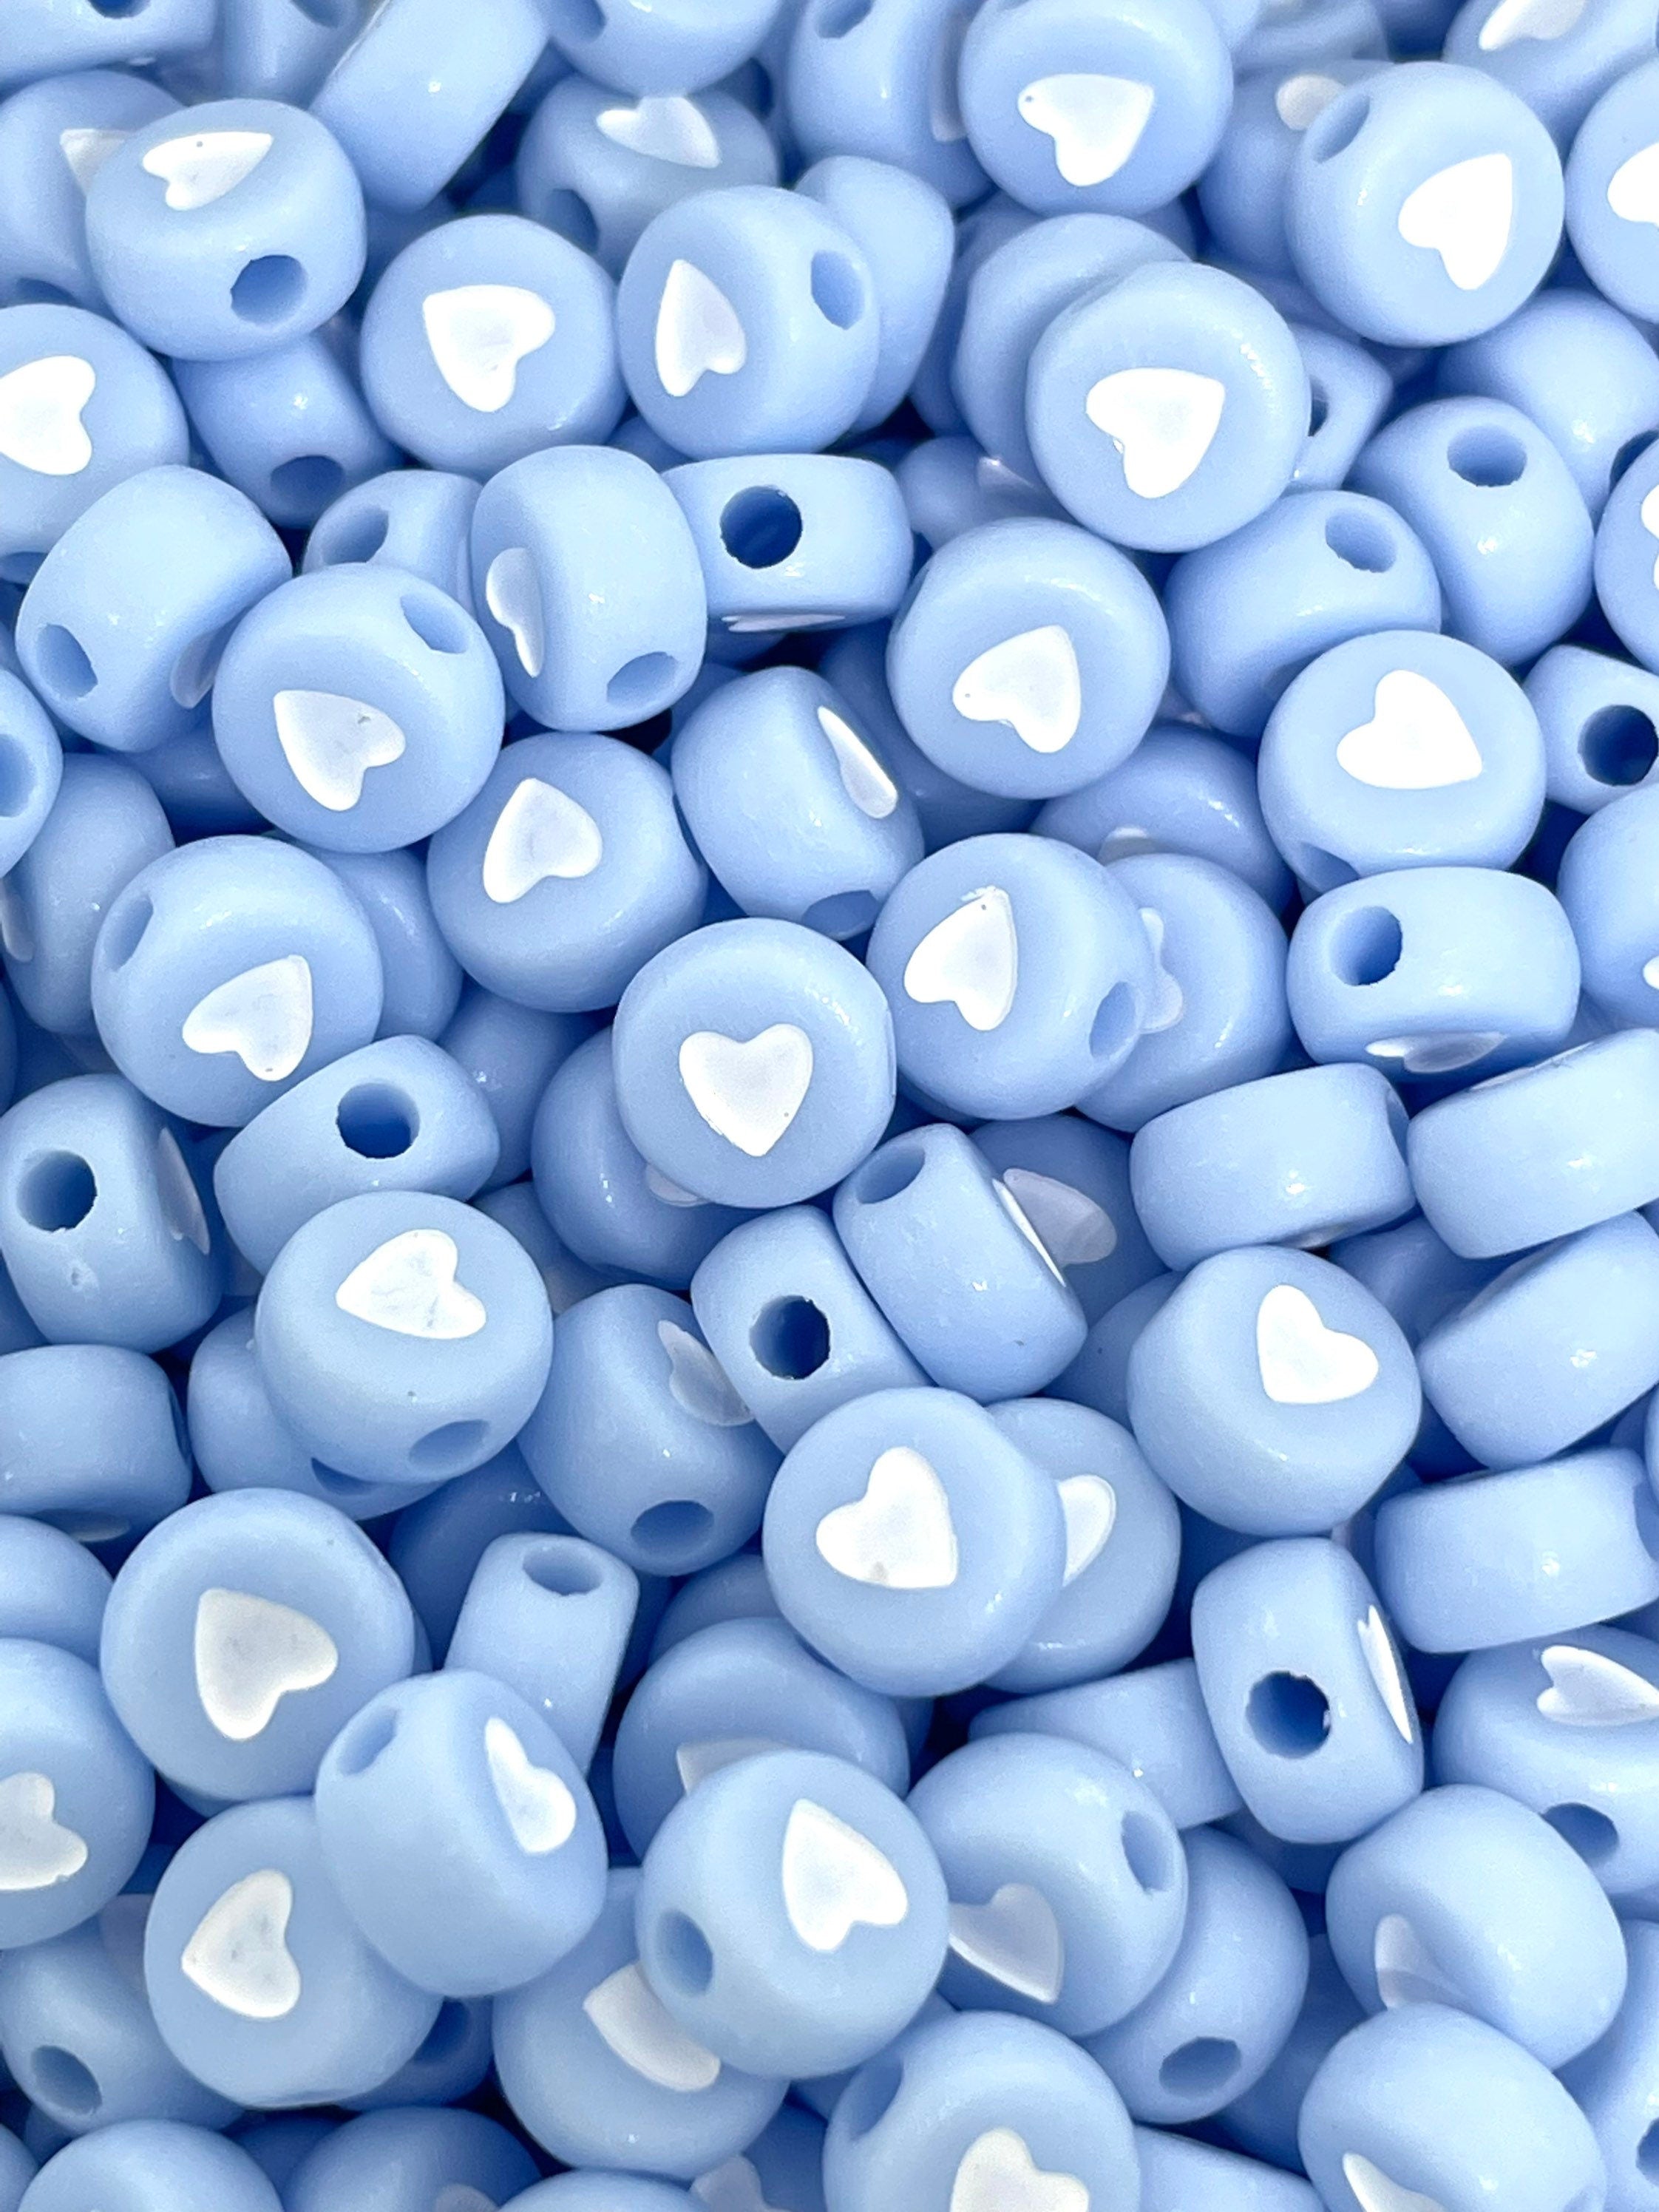 Baby Blue Beads with Hearts, Coin Beads, Flat Round Beads for Jewelry  Making, Gender Reveal Beads, Letter Beads, Blue Spacer Beads